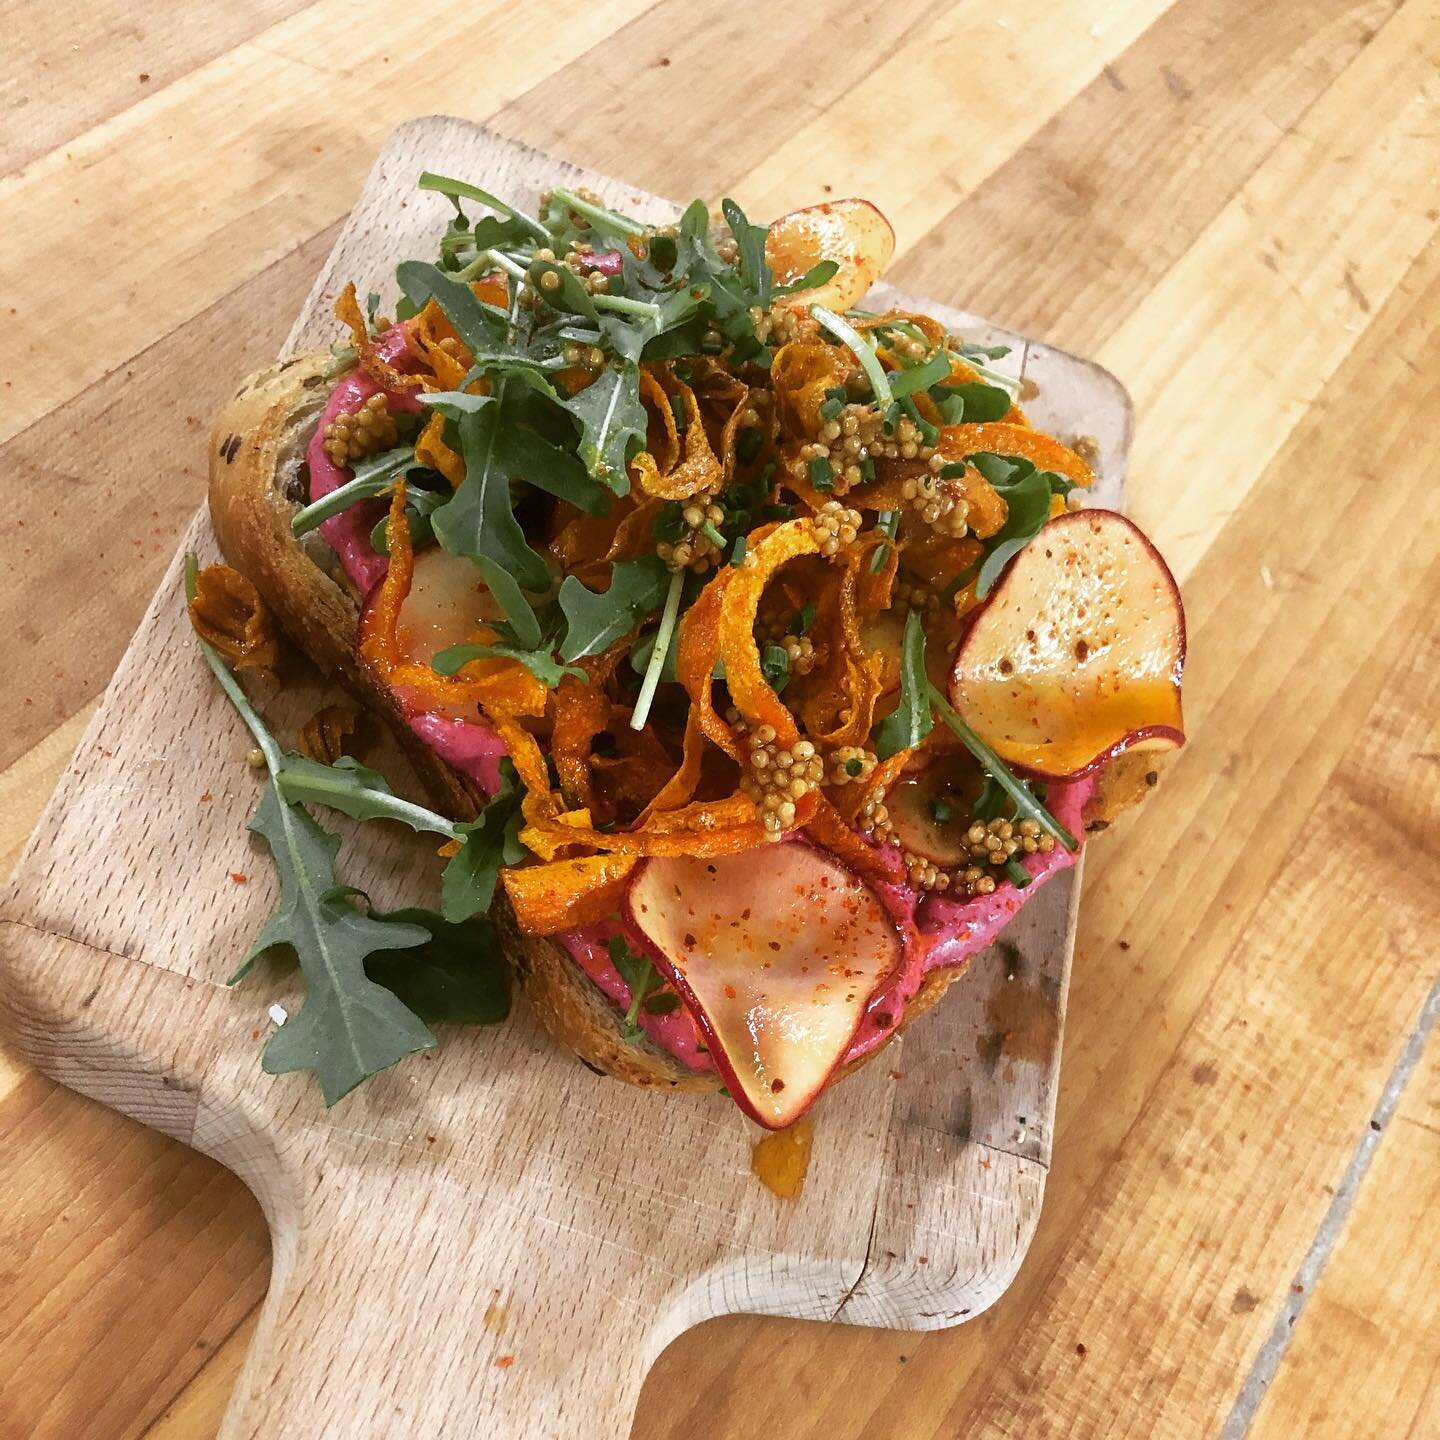 Spring has sprung here at Fressen, we&rsquo;re not paying attention to the rain 🤣!! Our chef is bringing a crazy delicious veggie toast this weekend with beet cream cheese, lemon vinaigrette marinated radishes and fresh arugula on our housemade Jogg